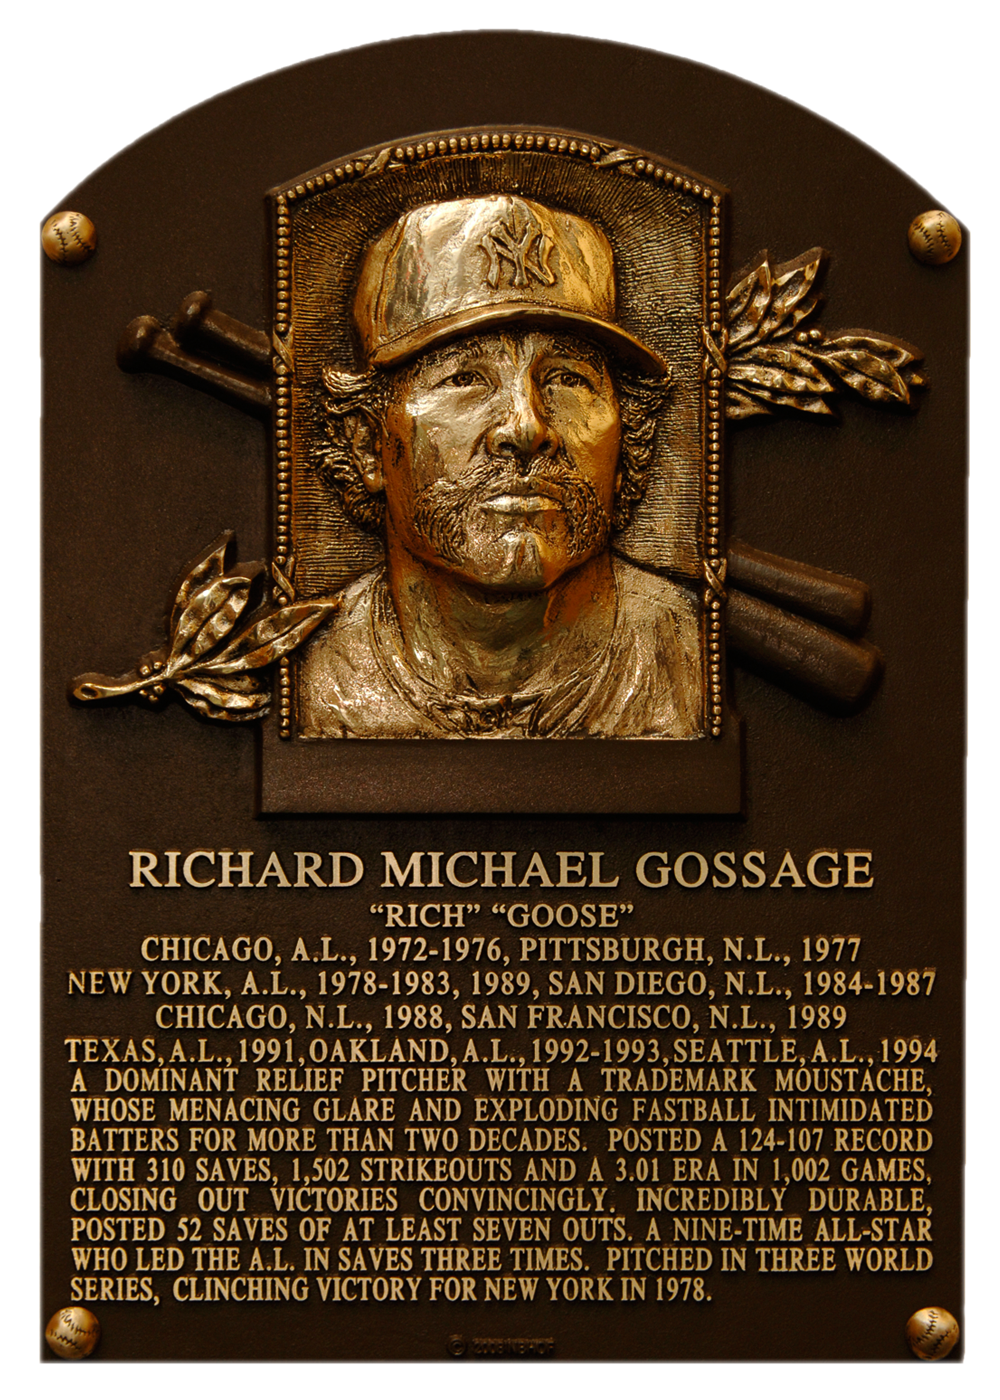 Goose Gossage Hall of Fame plaque